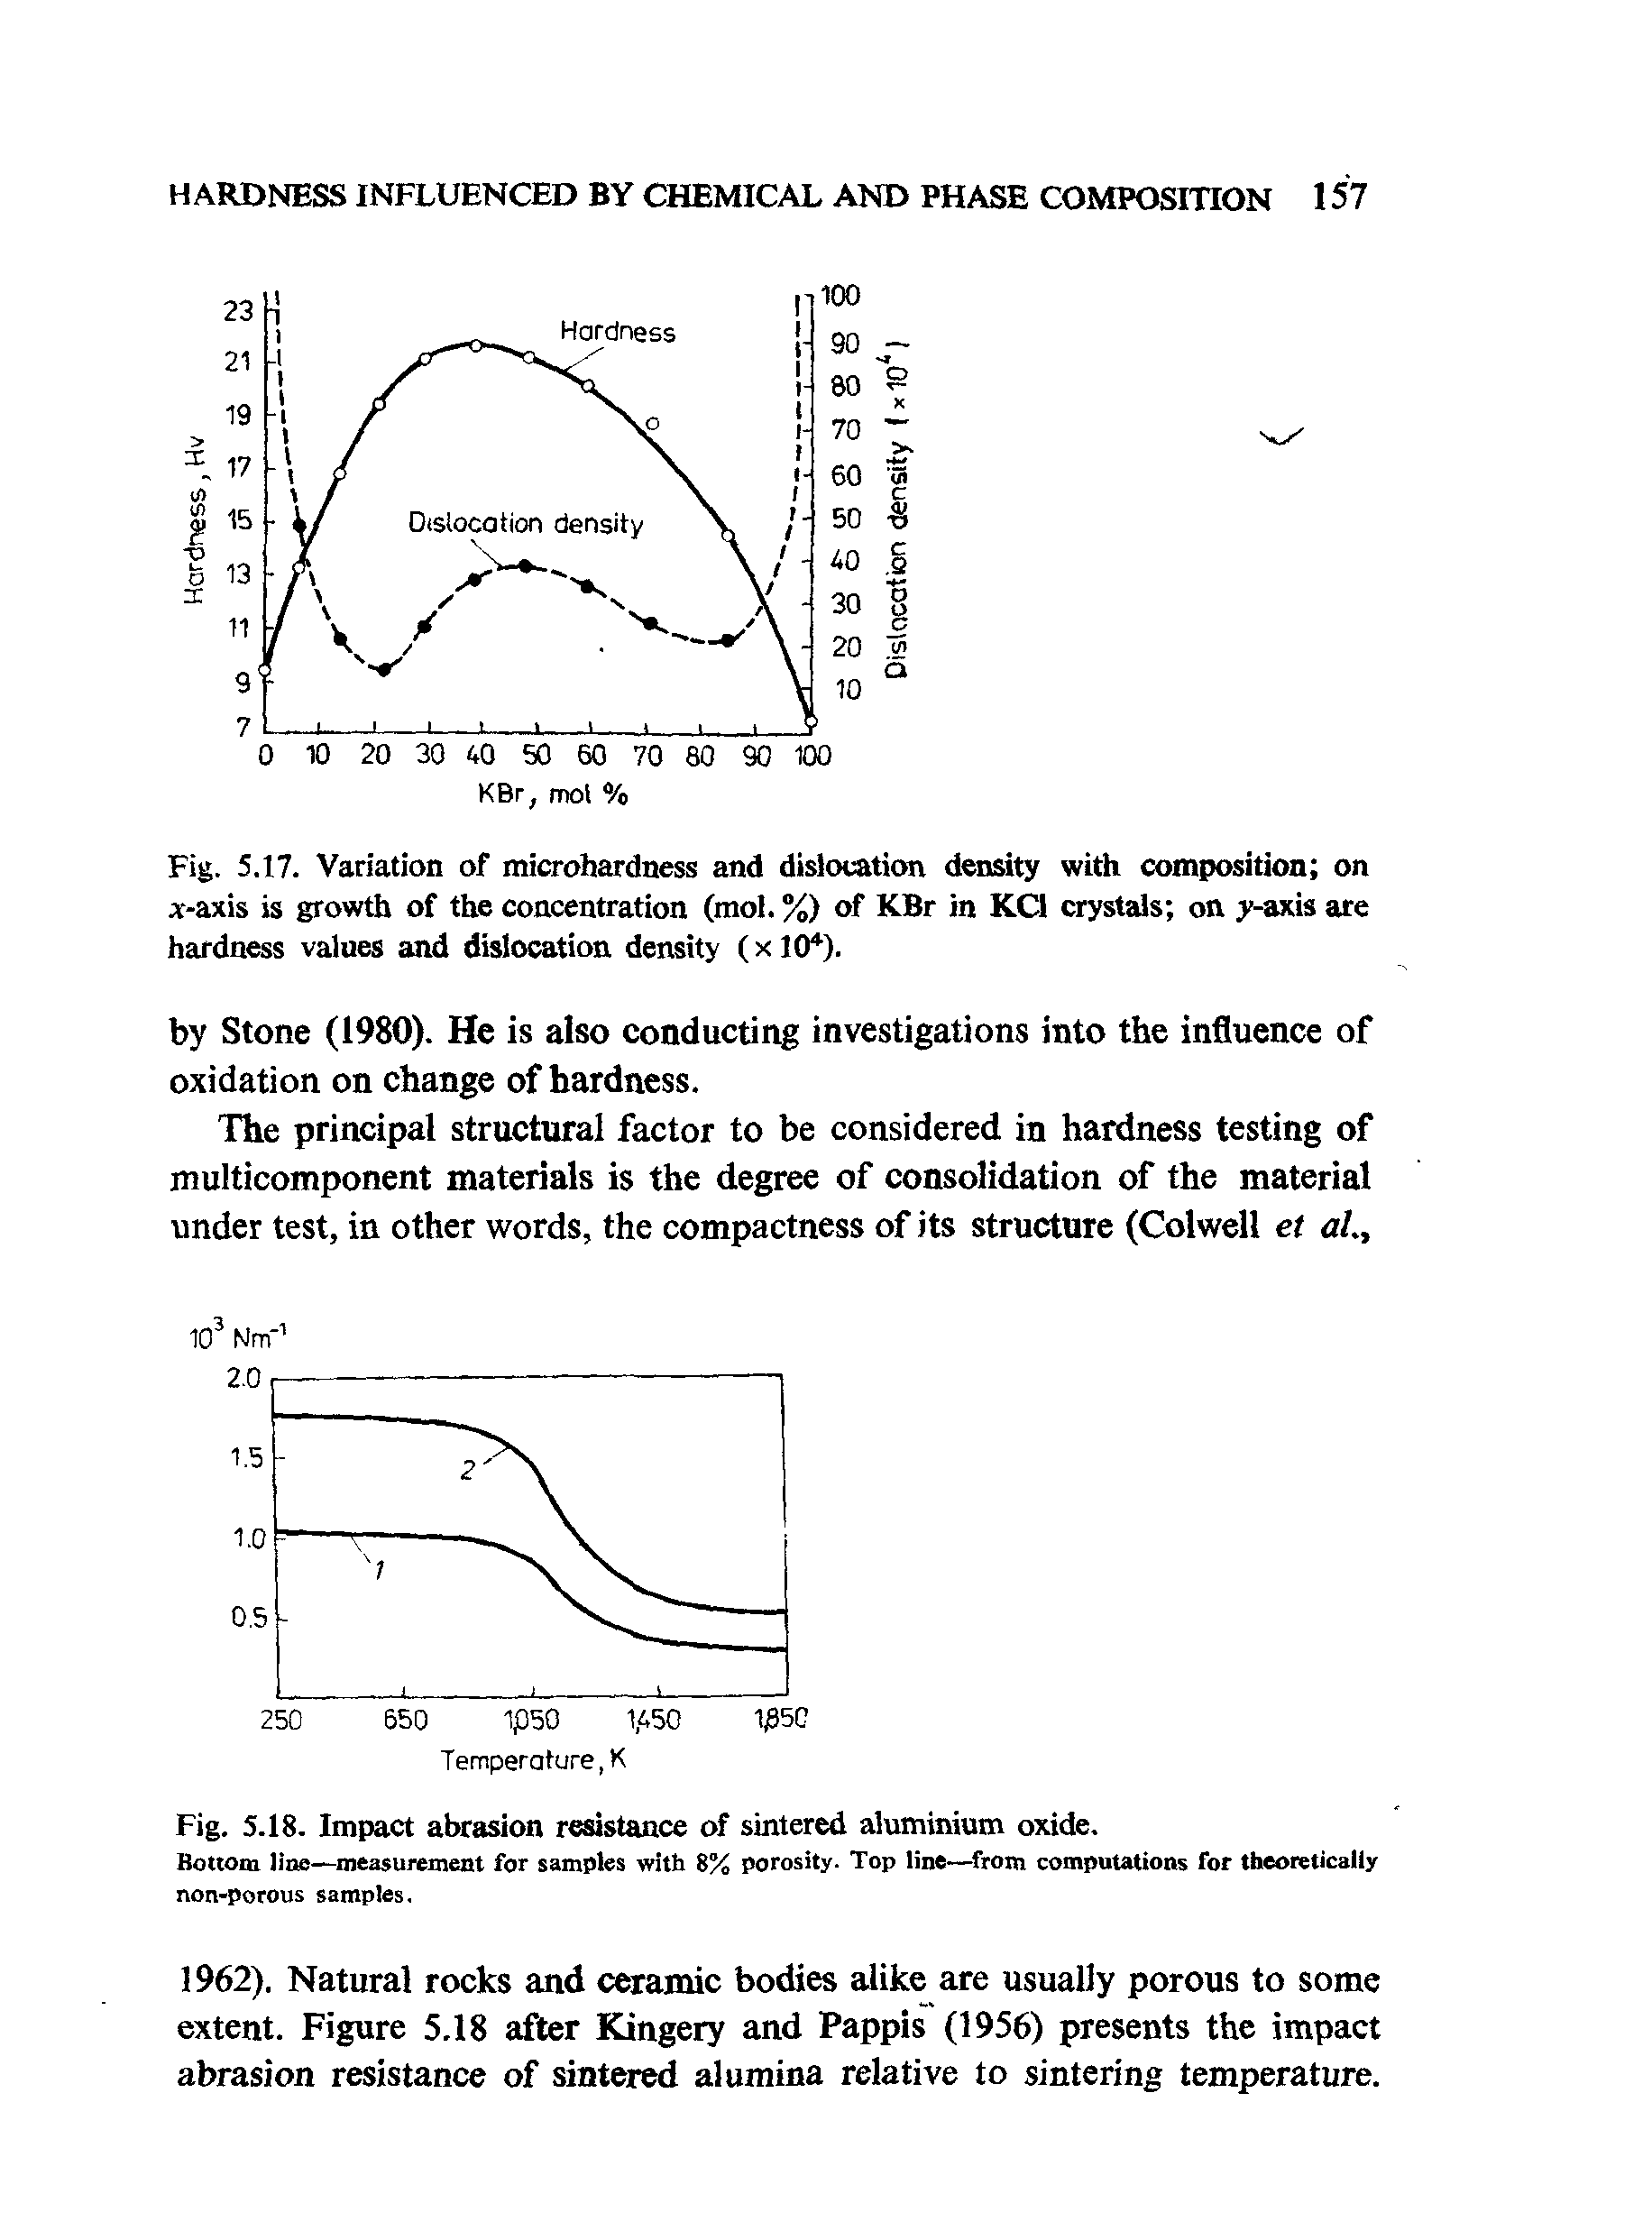 Fig. 5.18. Impact abrasion resistance of sintered aluminium oxide.